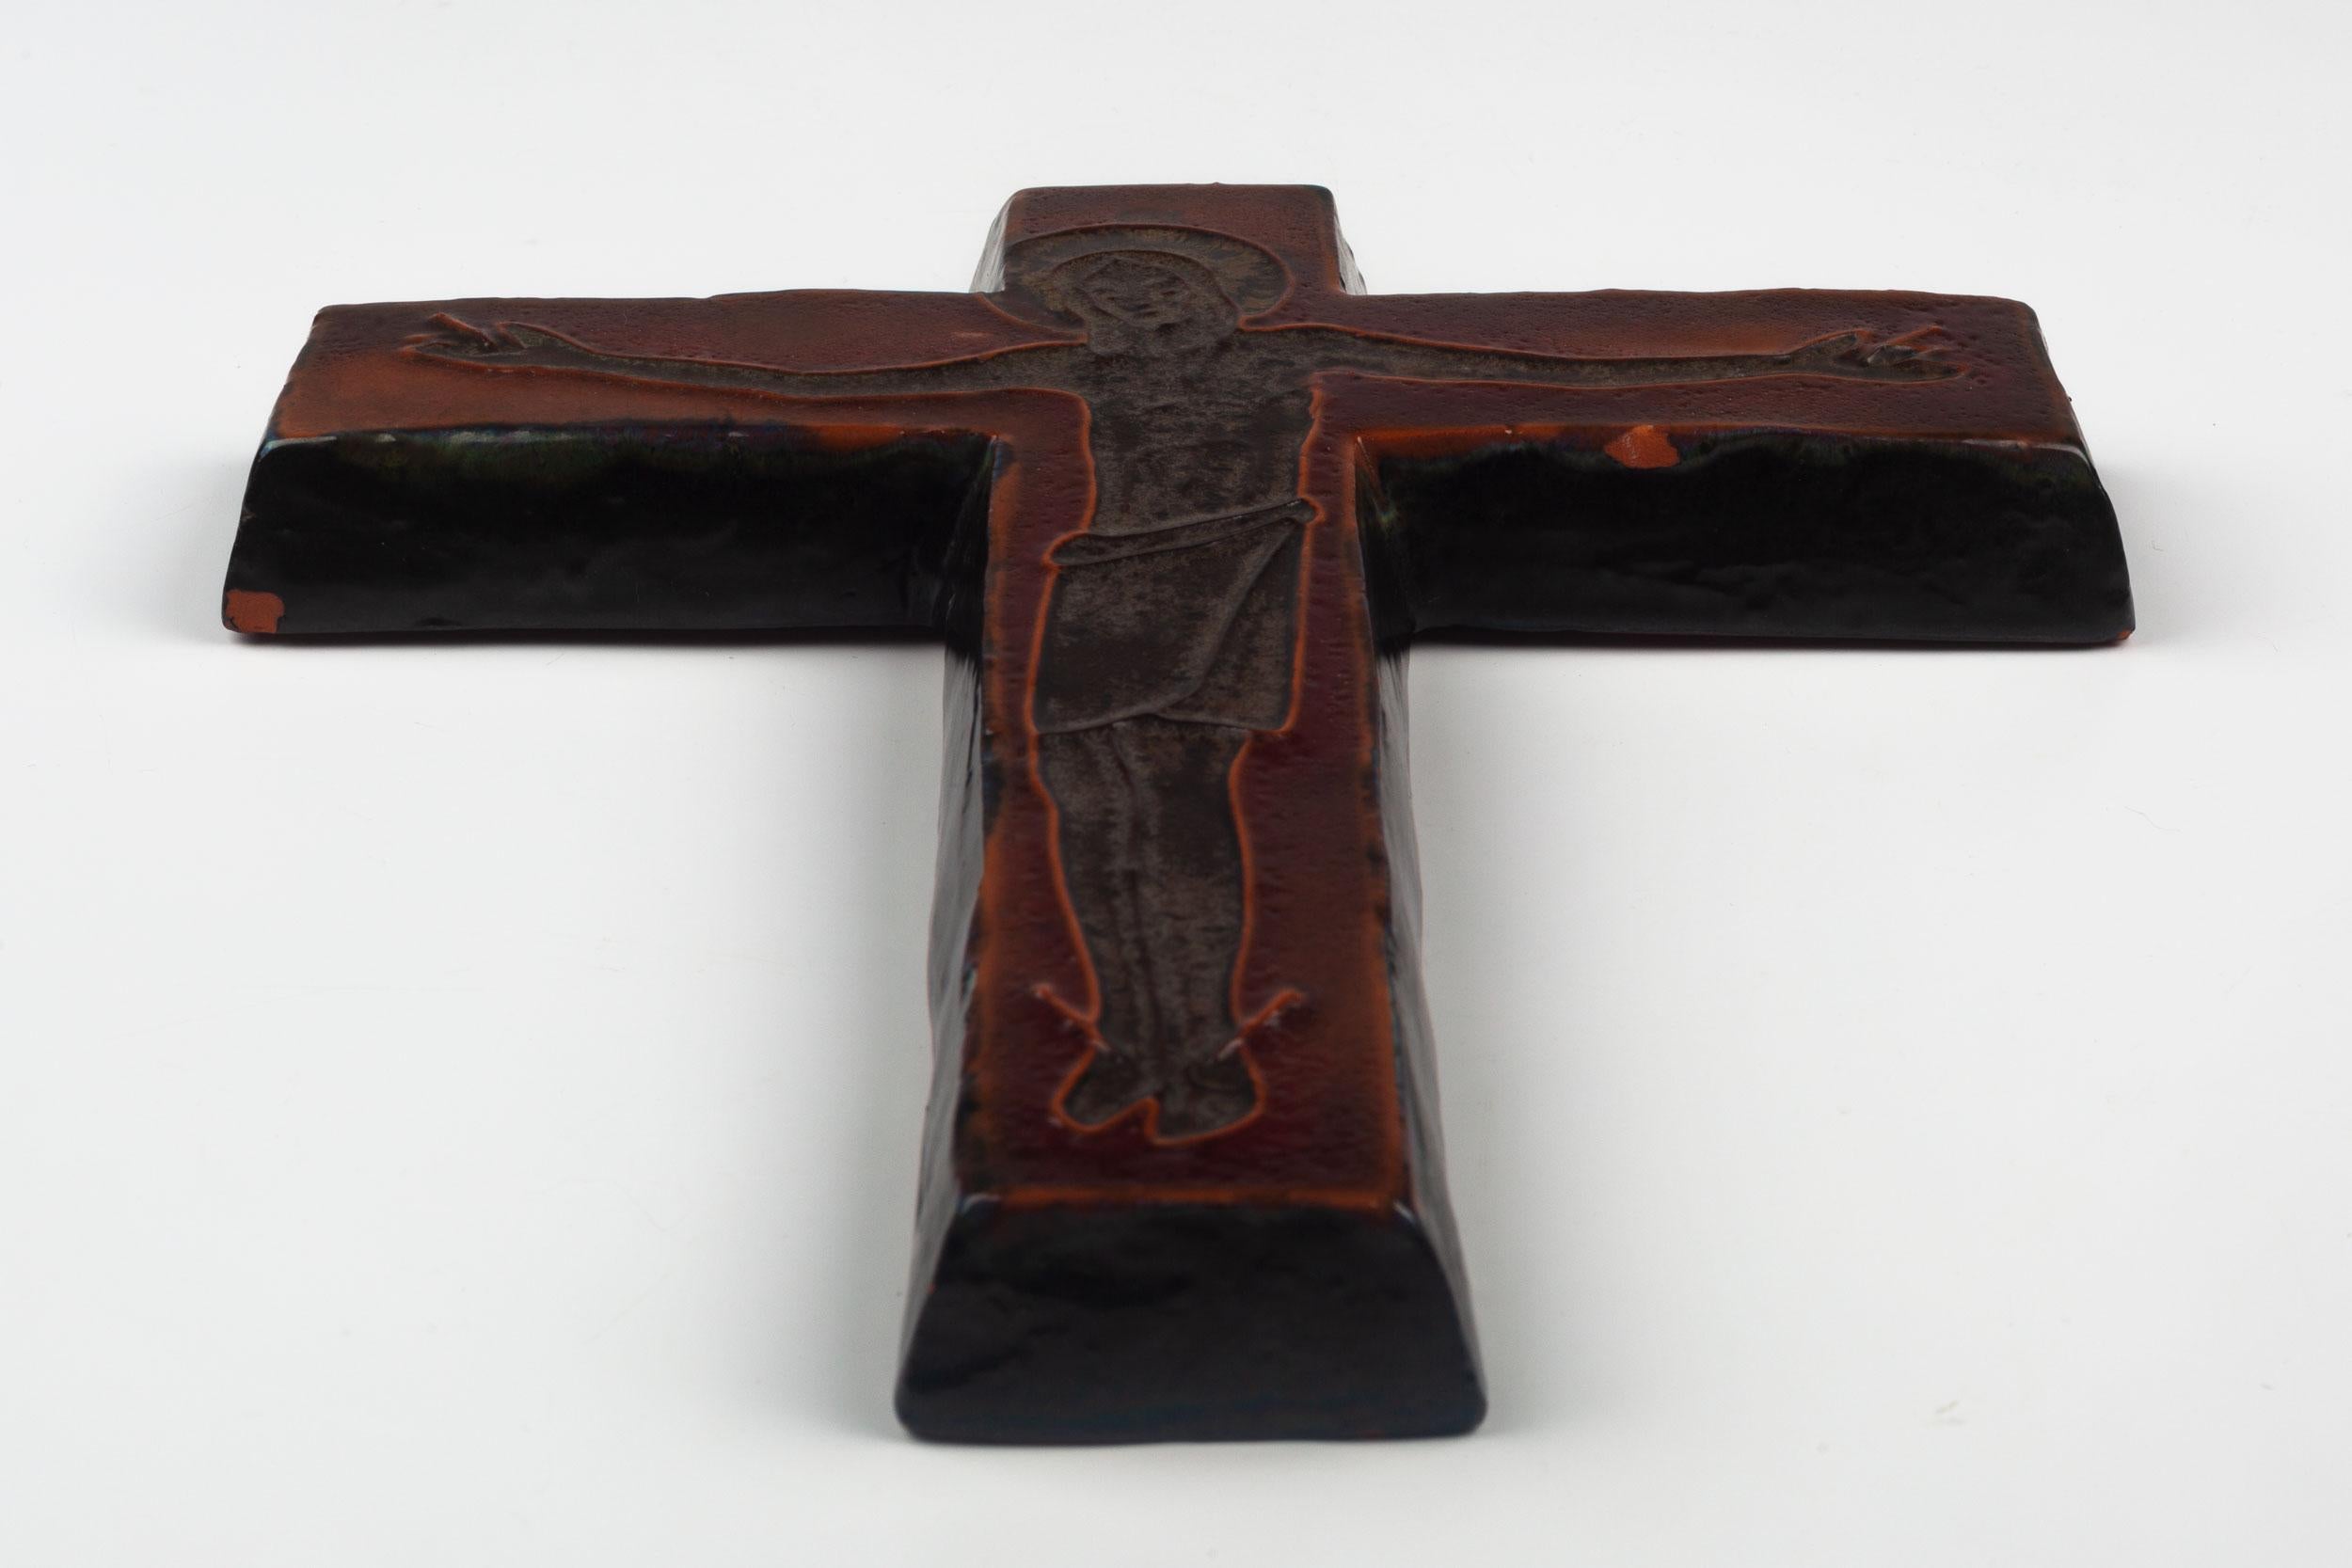 Midcentury European ceramic wall cross in sienna brown and black, with slight texture to the glazed ceramic and a mastery of depth of color. From a large collection of crosses handmade by Flemish artisans.

From modernism to brutalism, the crosses